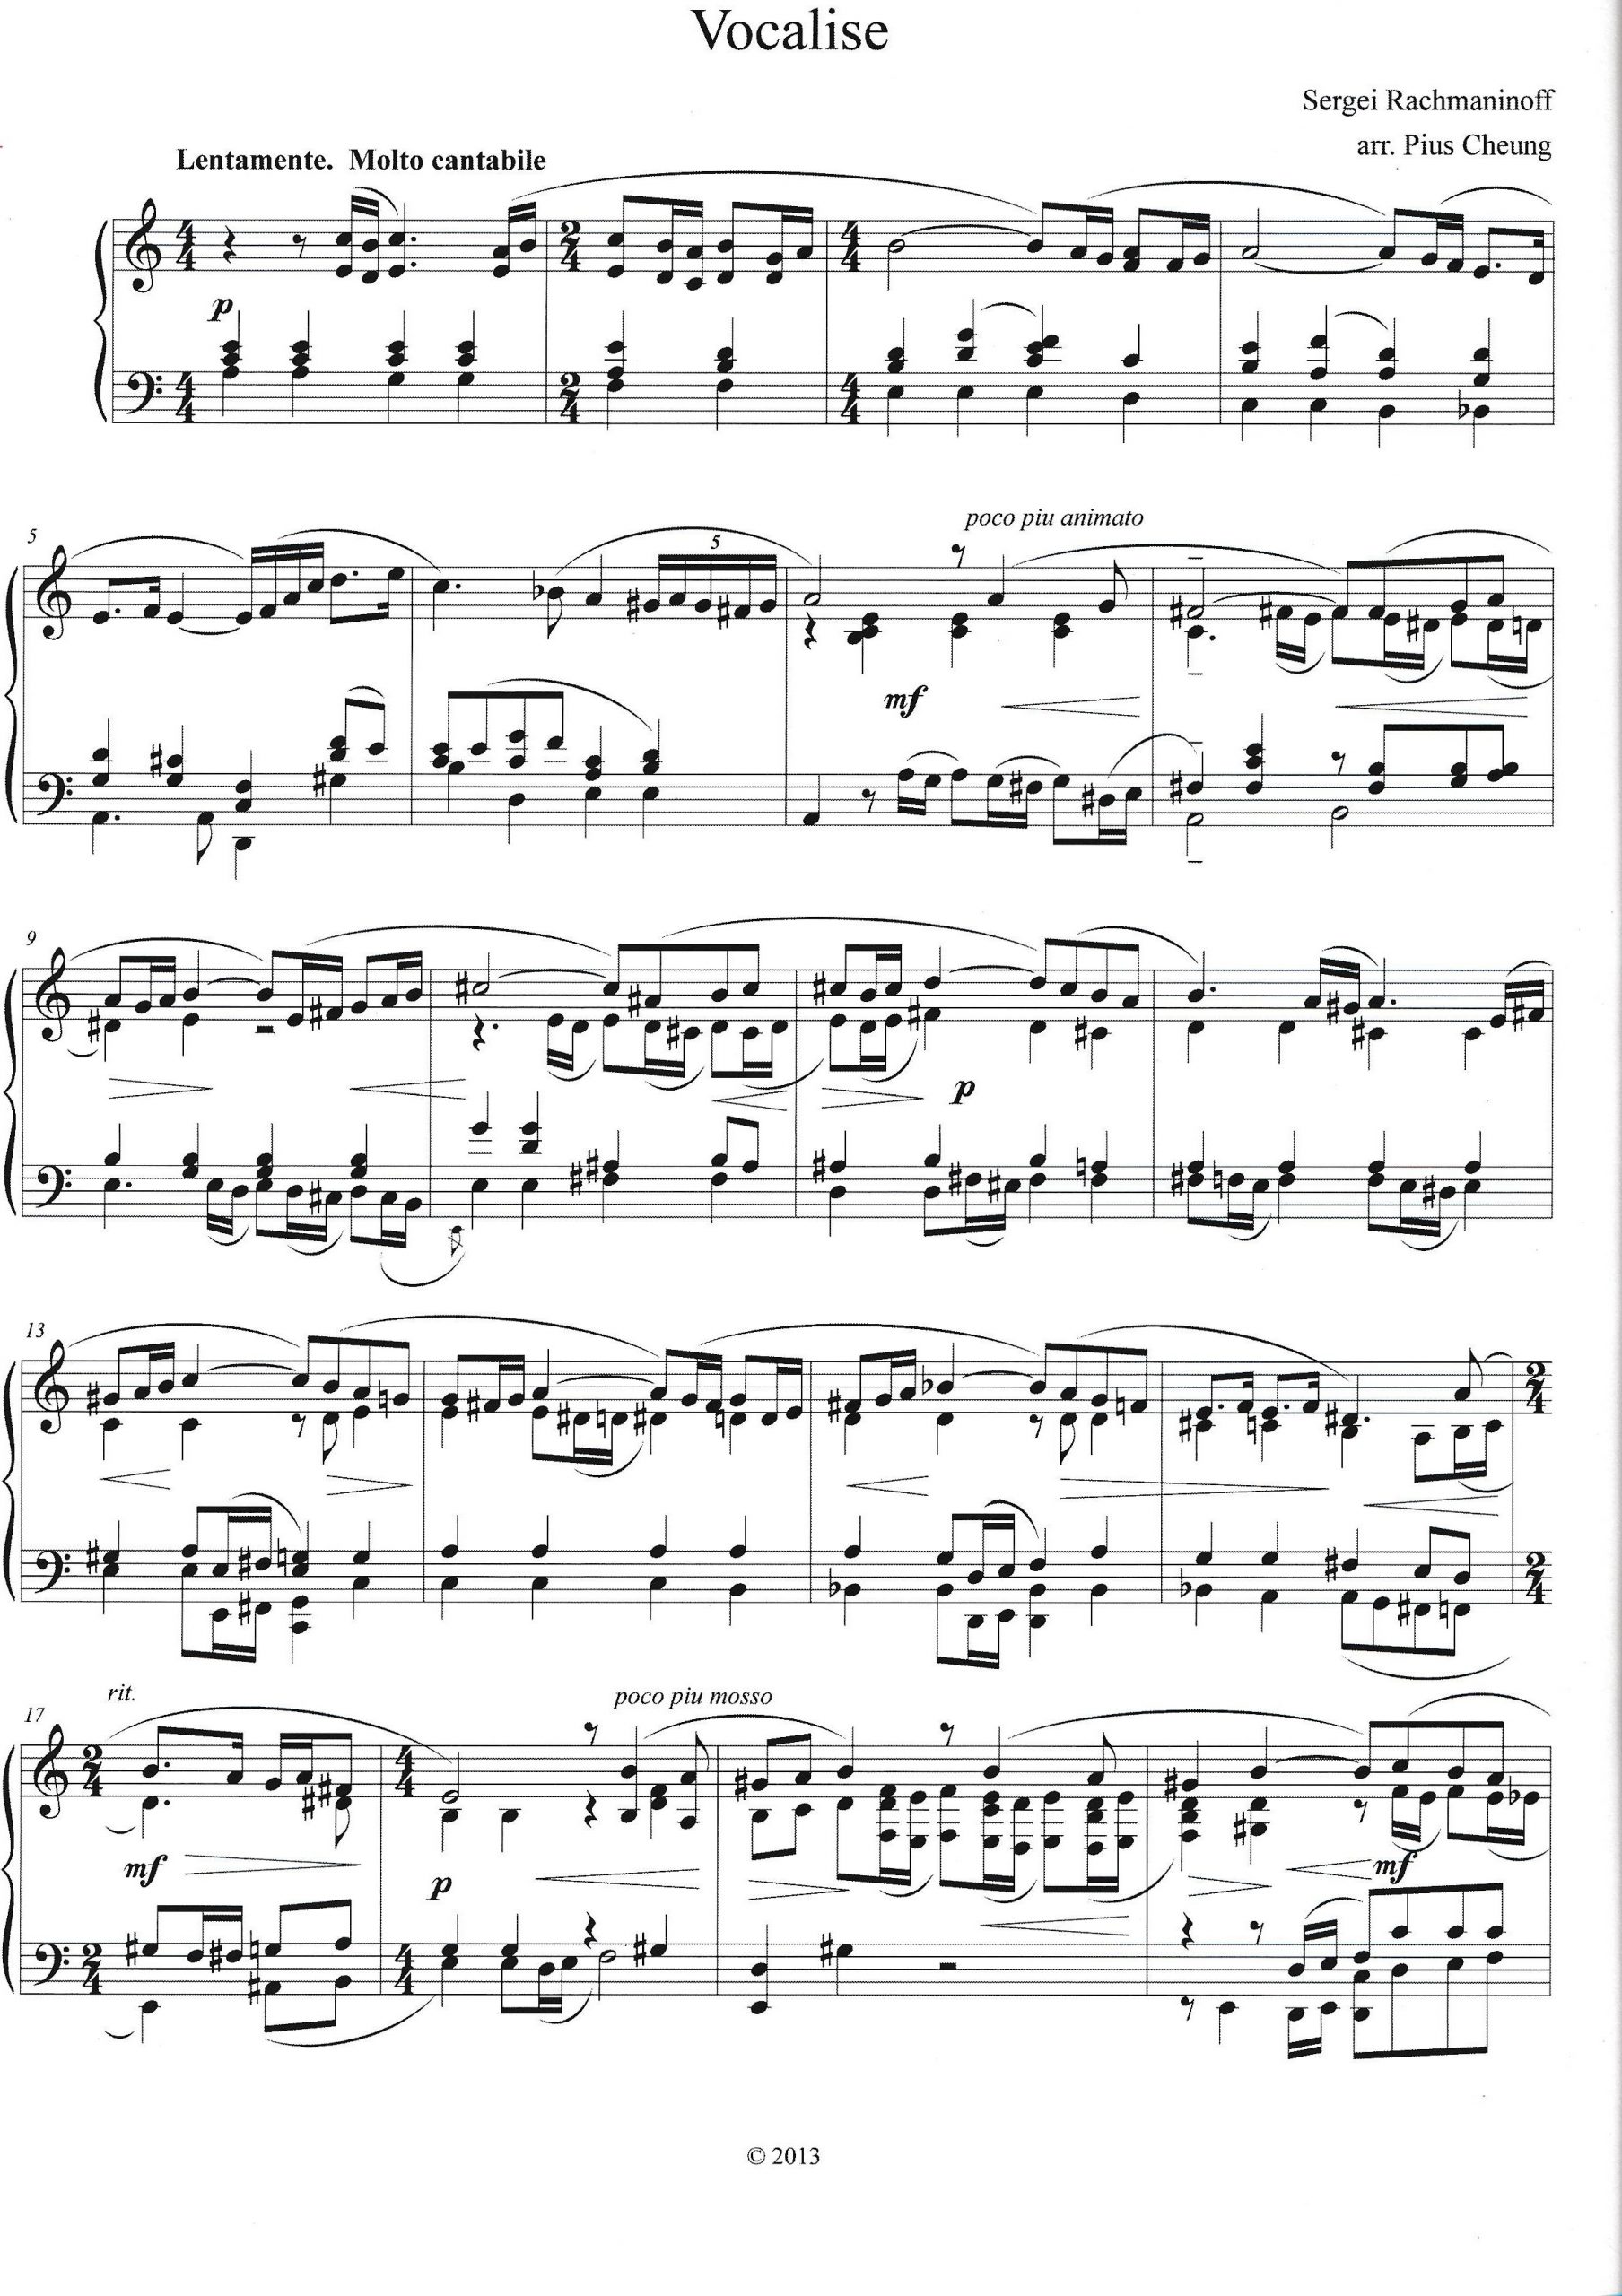 Vocalise by Rachmaninoff arr. Pius Cheung